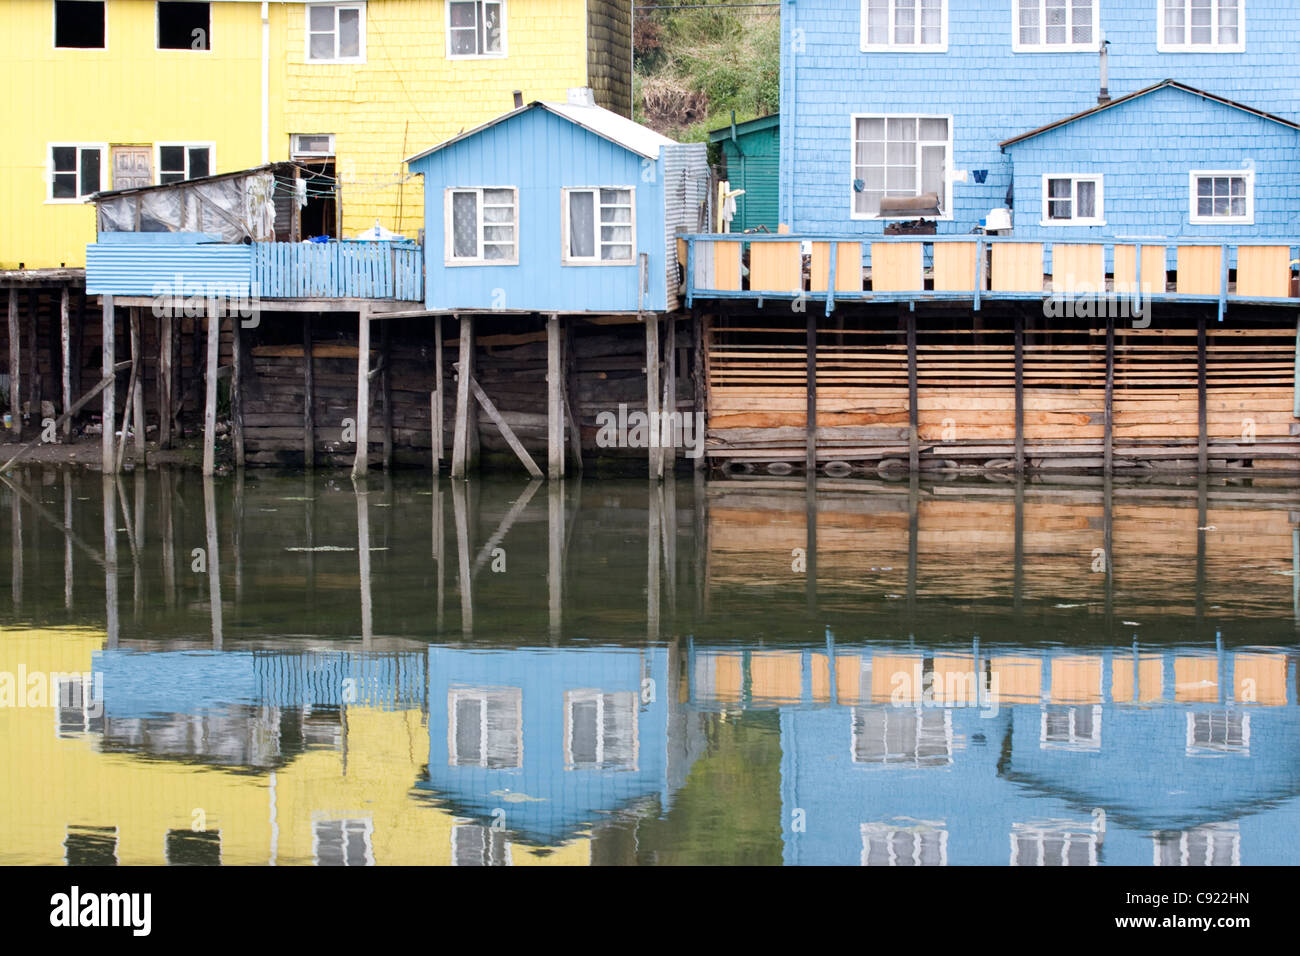 Chiloe Island is the largest island of the Chiloe Archipelago, off the coast in the Pacific Ocean. Stock Photo